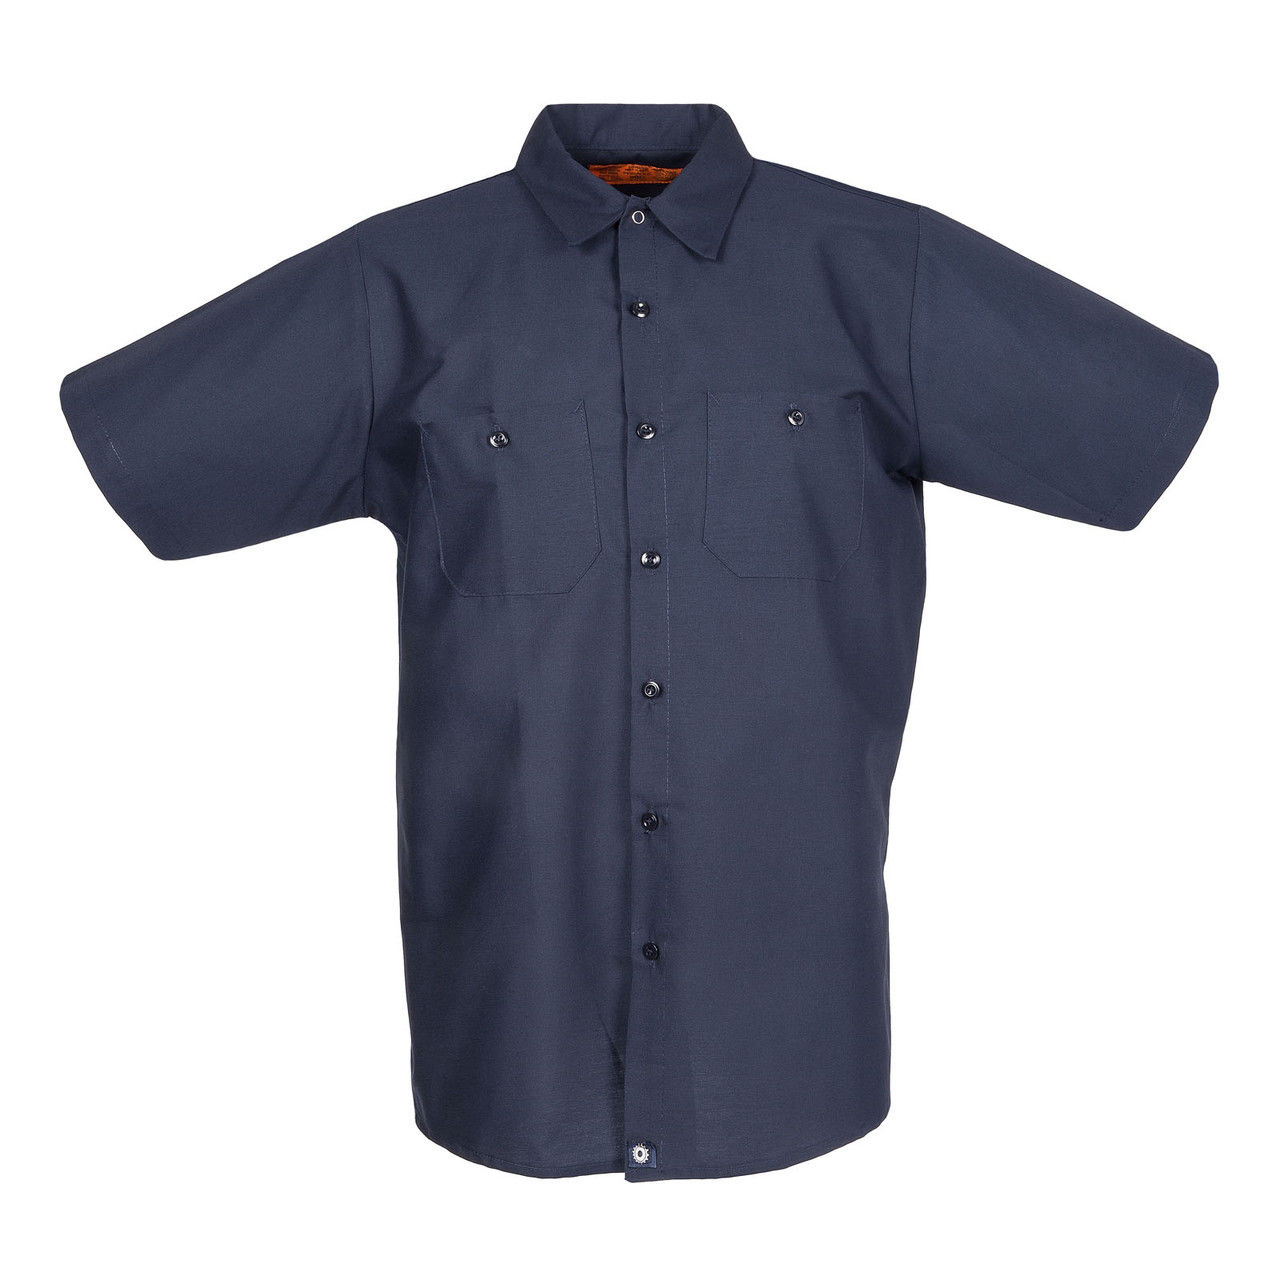 S12NV Men's Short Sleeve Navy Blue Industrial Work Shirt Questions & Answers